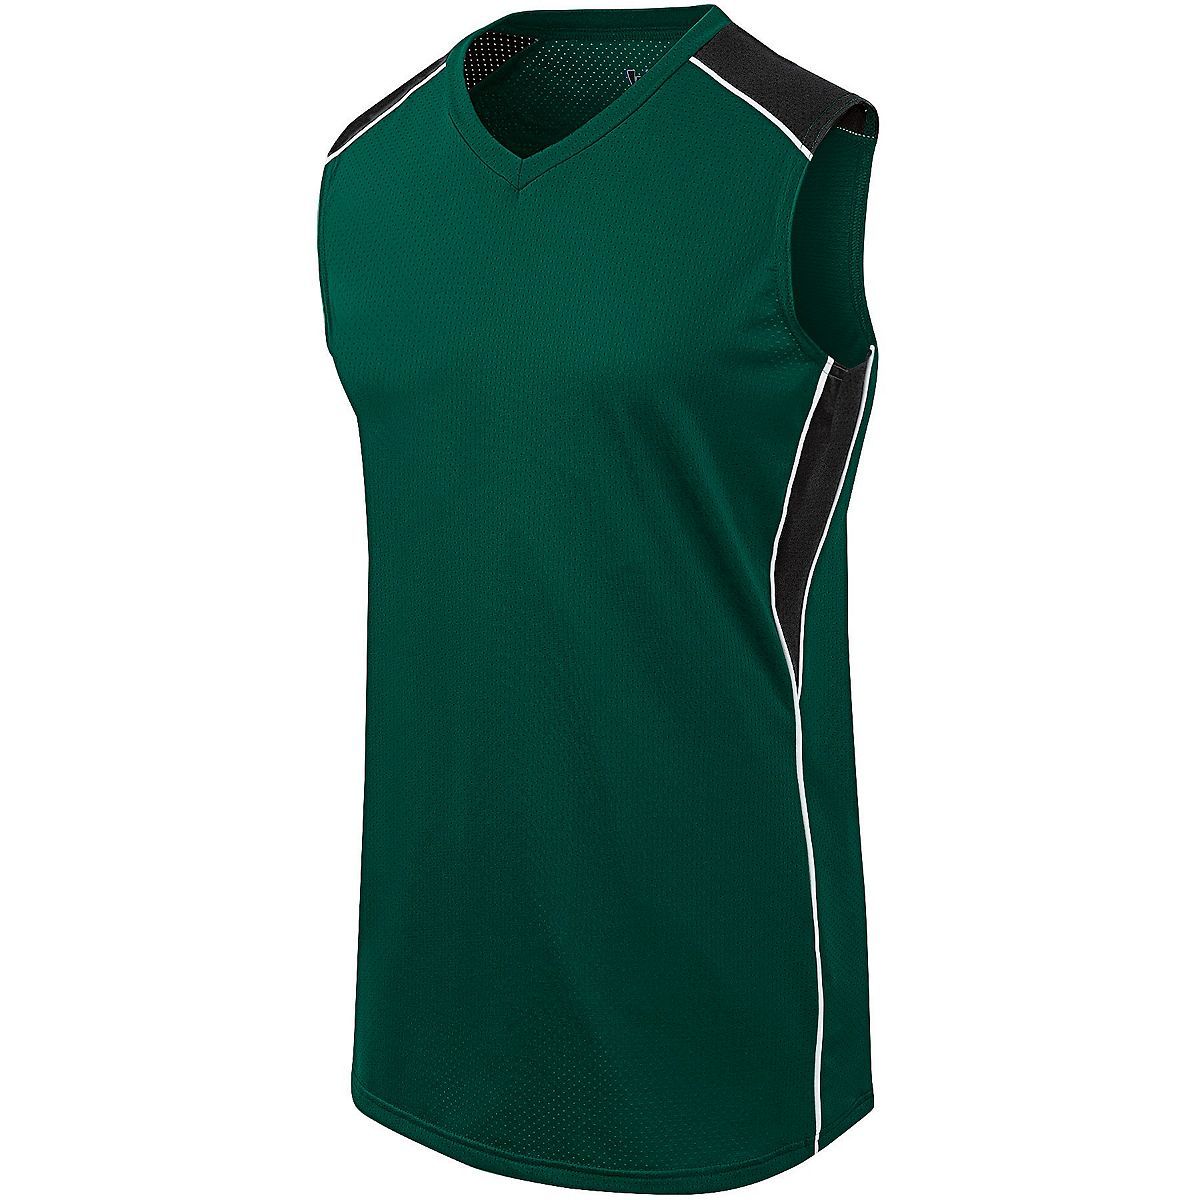 Augusta Sportswear Ladies Dynamite Jersey in Forest/Black/White  -Part of the Ladies, Ladies-Jersey, Augusta-Products, Softball, Shirts product lines at KanaleyCreations.com